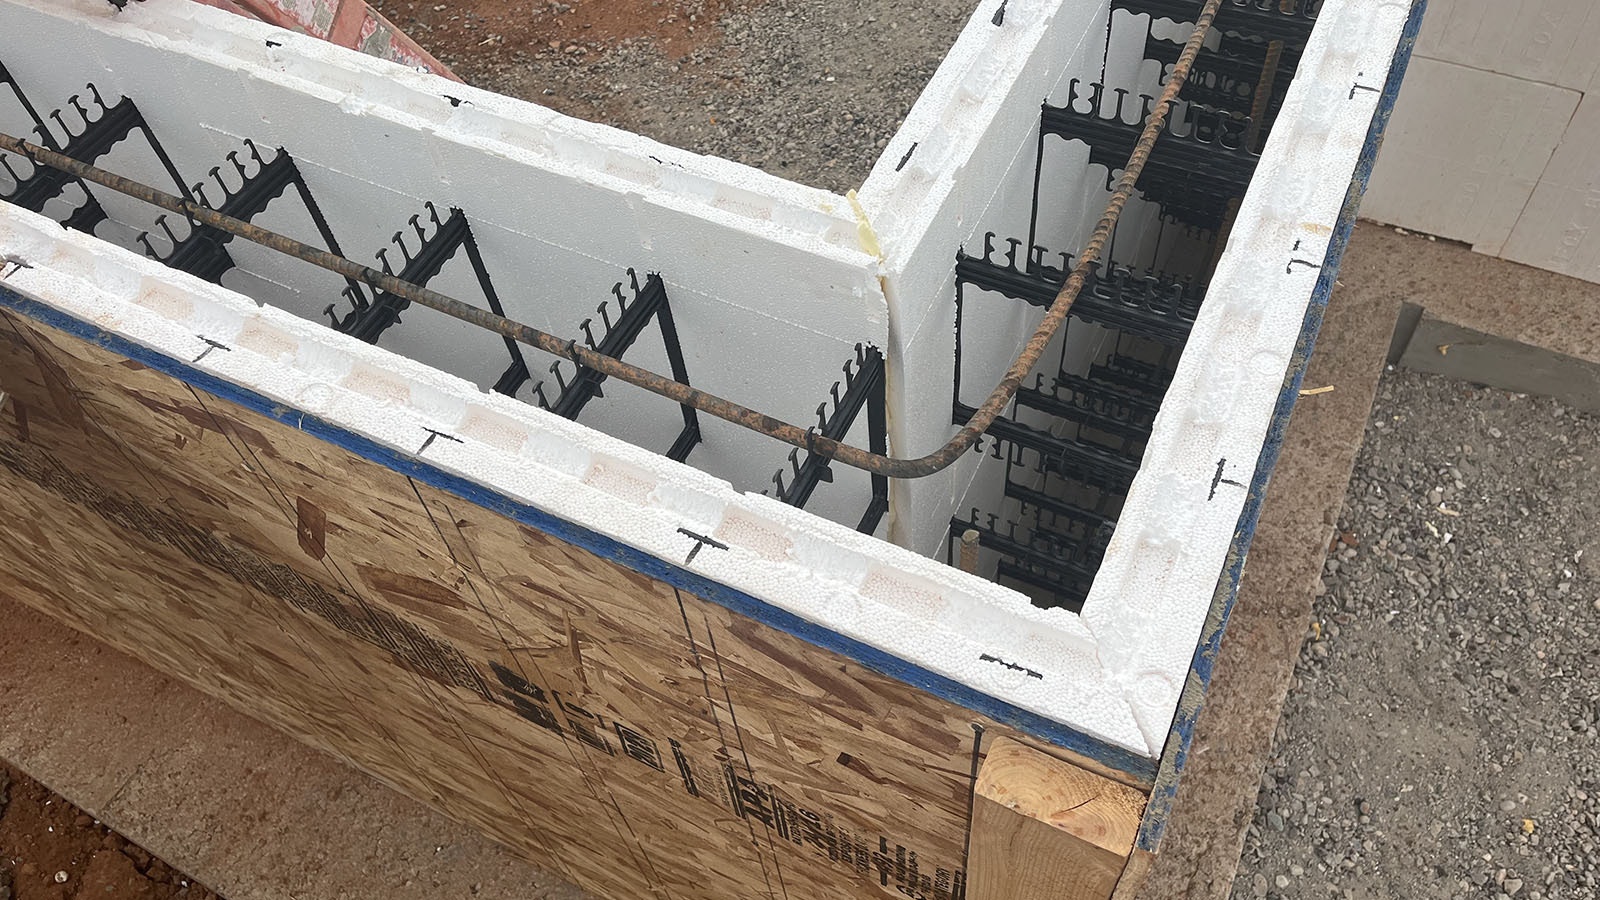 Forms and reinforcements are set up to pour concrete for a building that will become new teacher housing for the local Thermopolis school district.